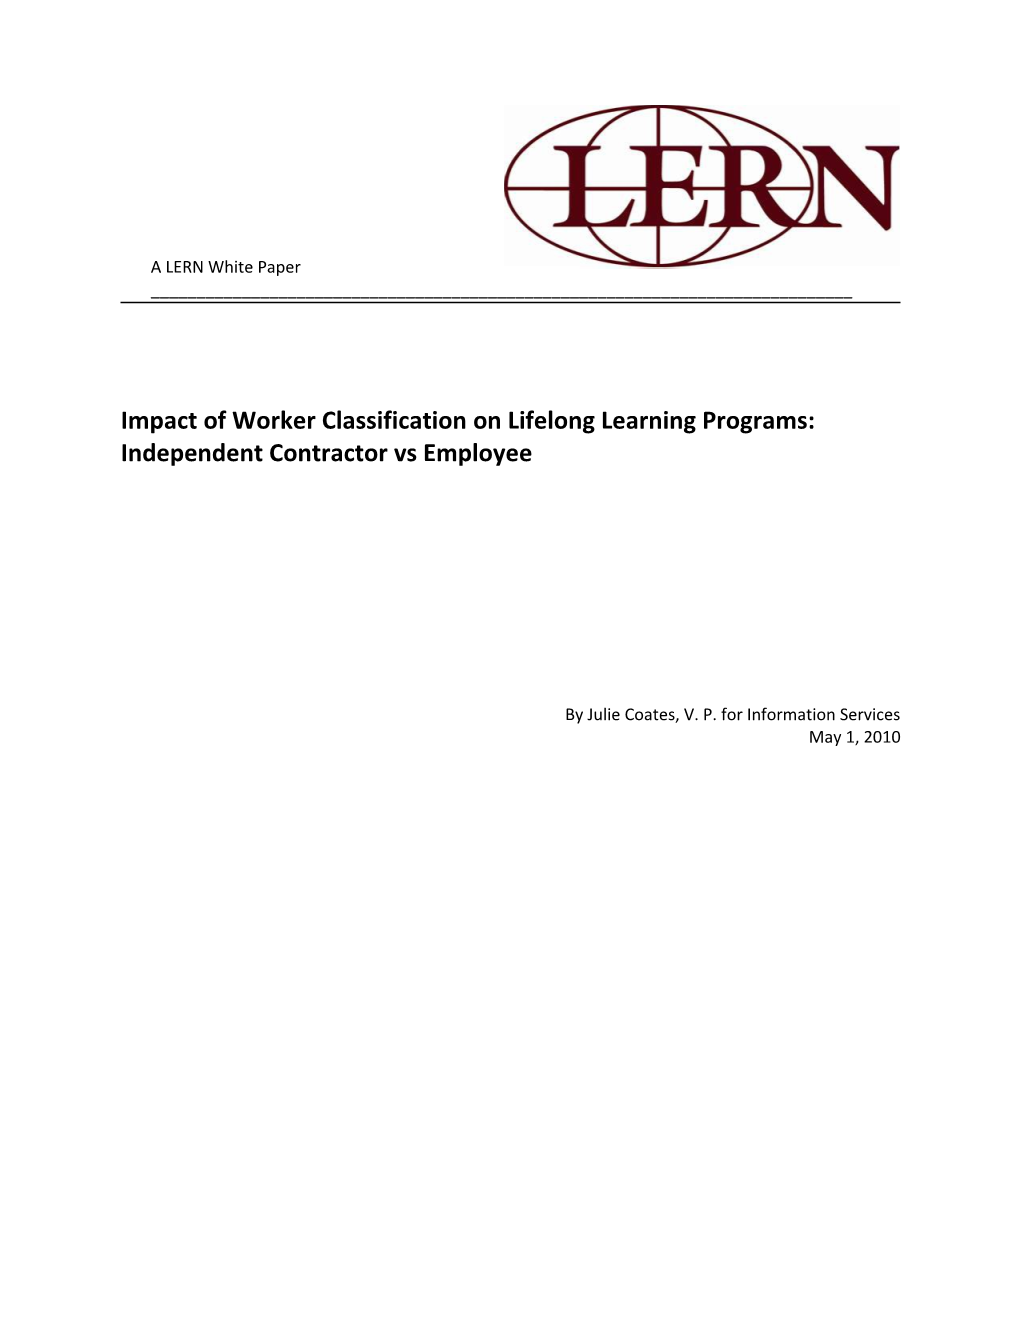 Impact of Worker Classification on Lifelong Learning Programs